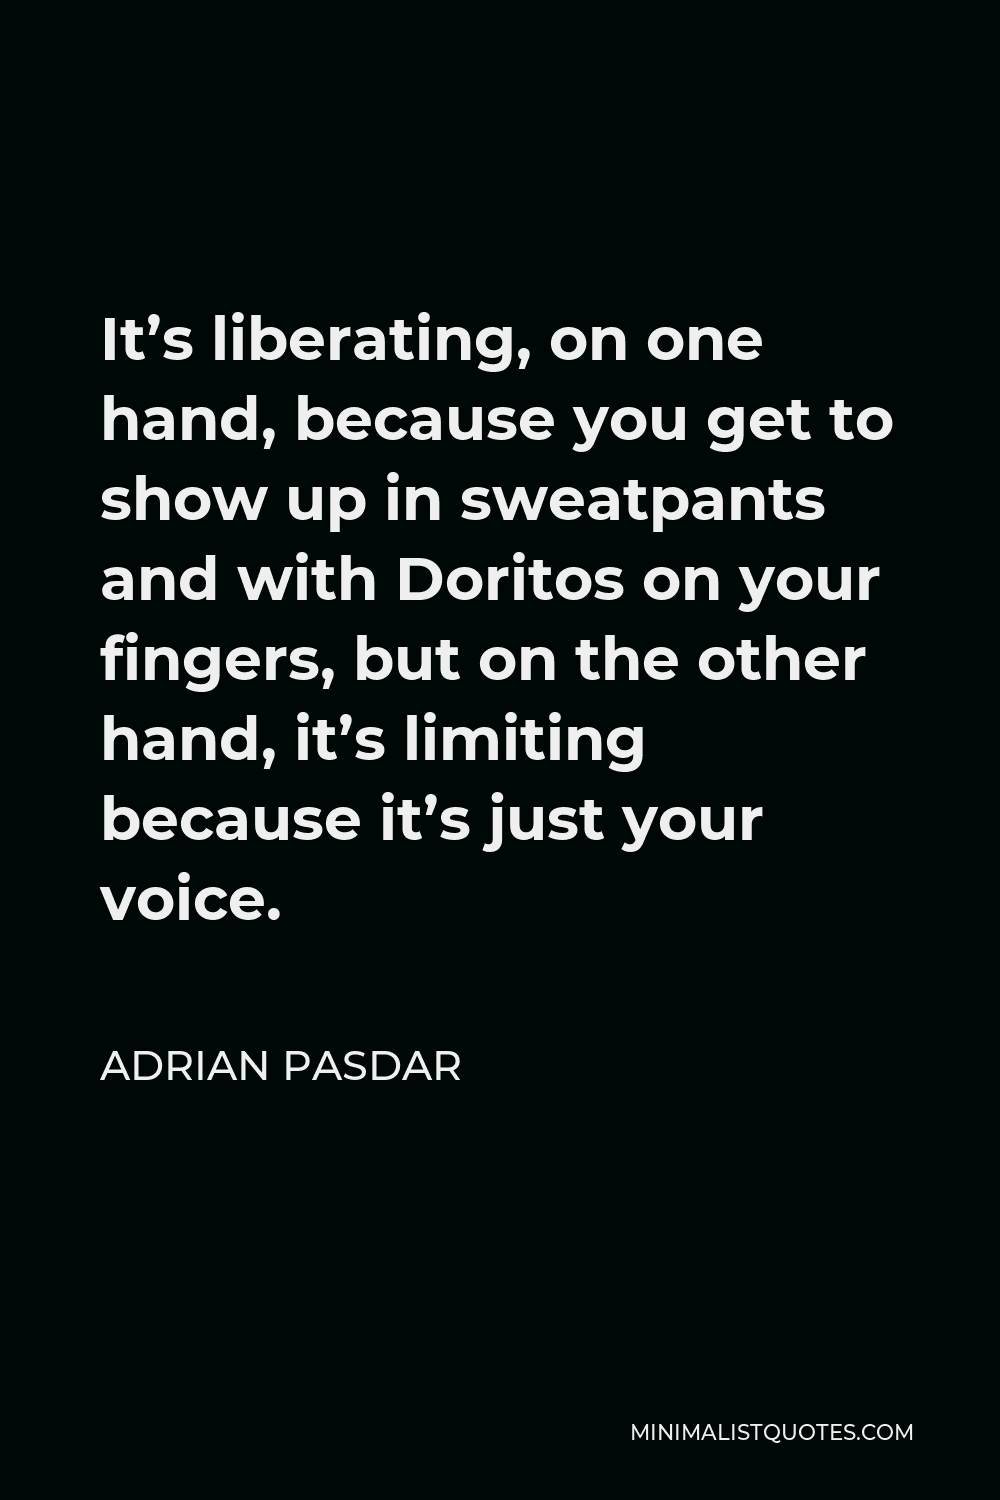 Adrian Pasdar Quote - It’s liberating, on one hand, because you get to show up in sweatpants and with Doritos on your fingers, but on the other hand, it’s limiting because it’s just your voice.